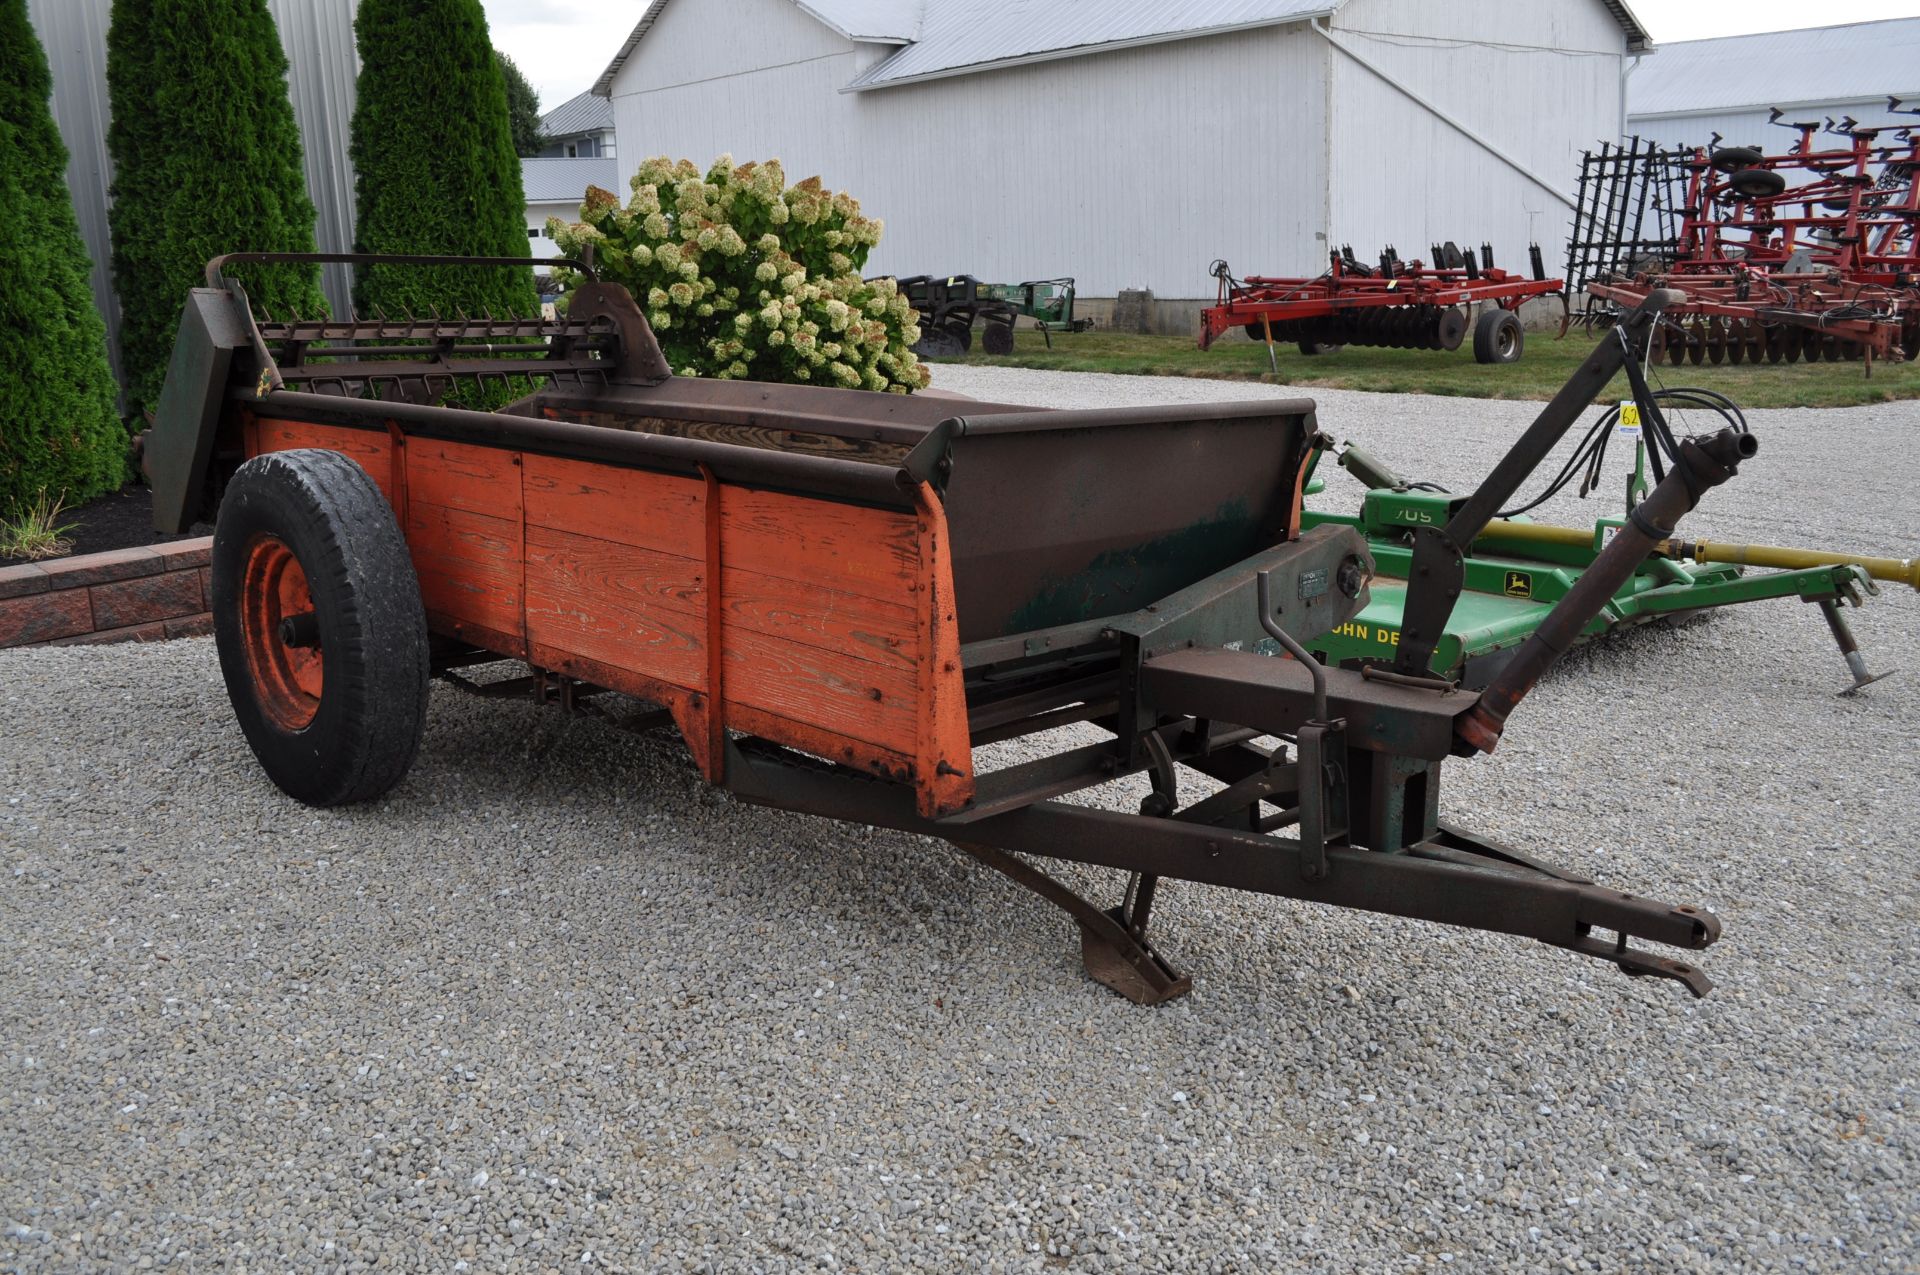 New Idea manure spreader, 540 pto, 11’ bed, triple beater - Image 2 of 12